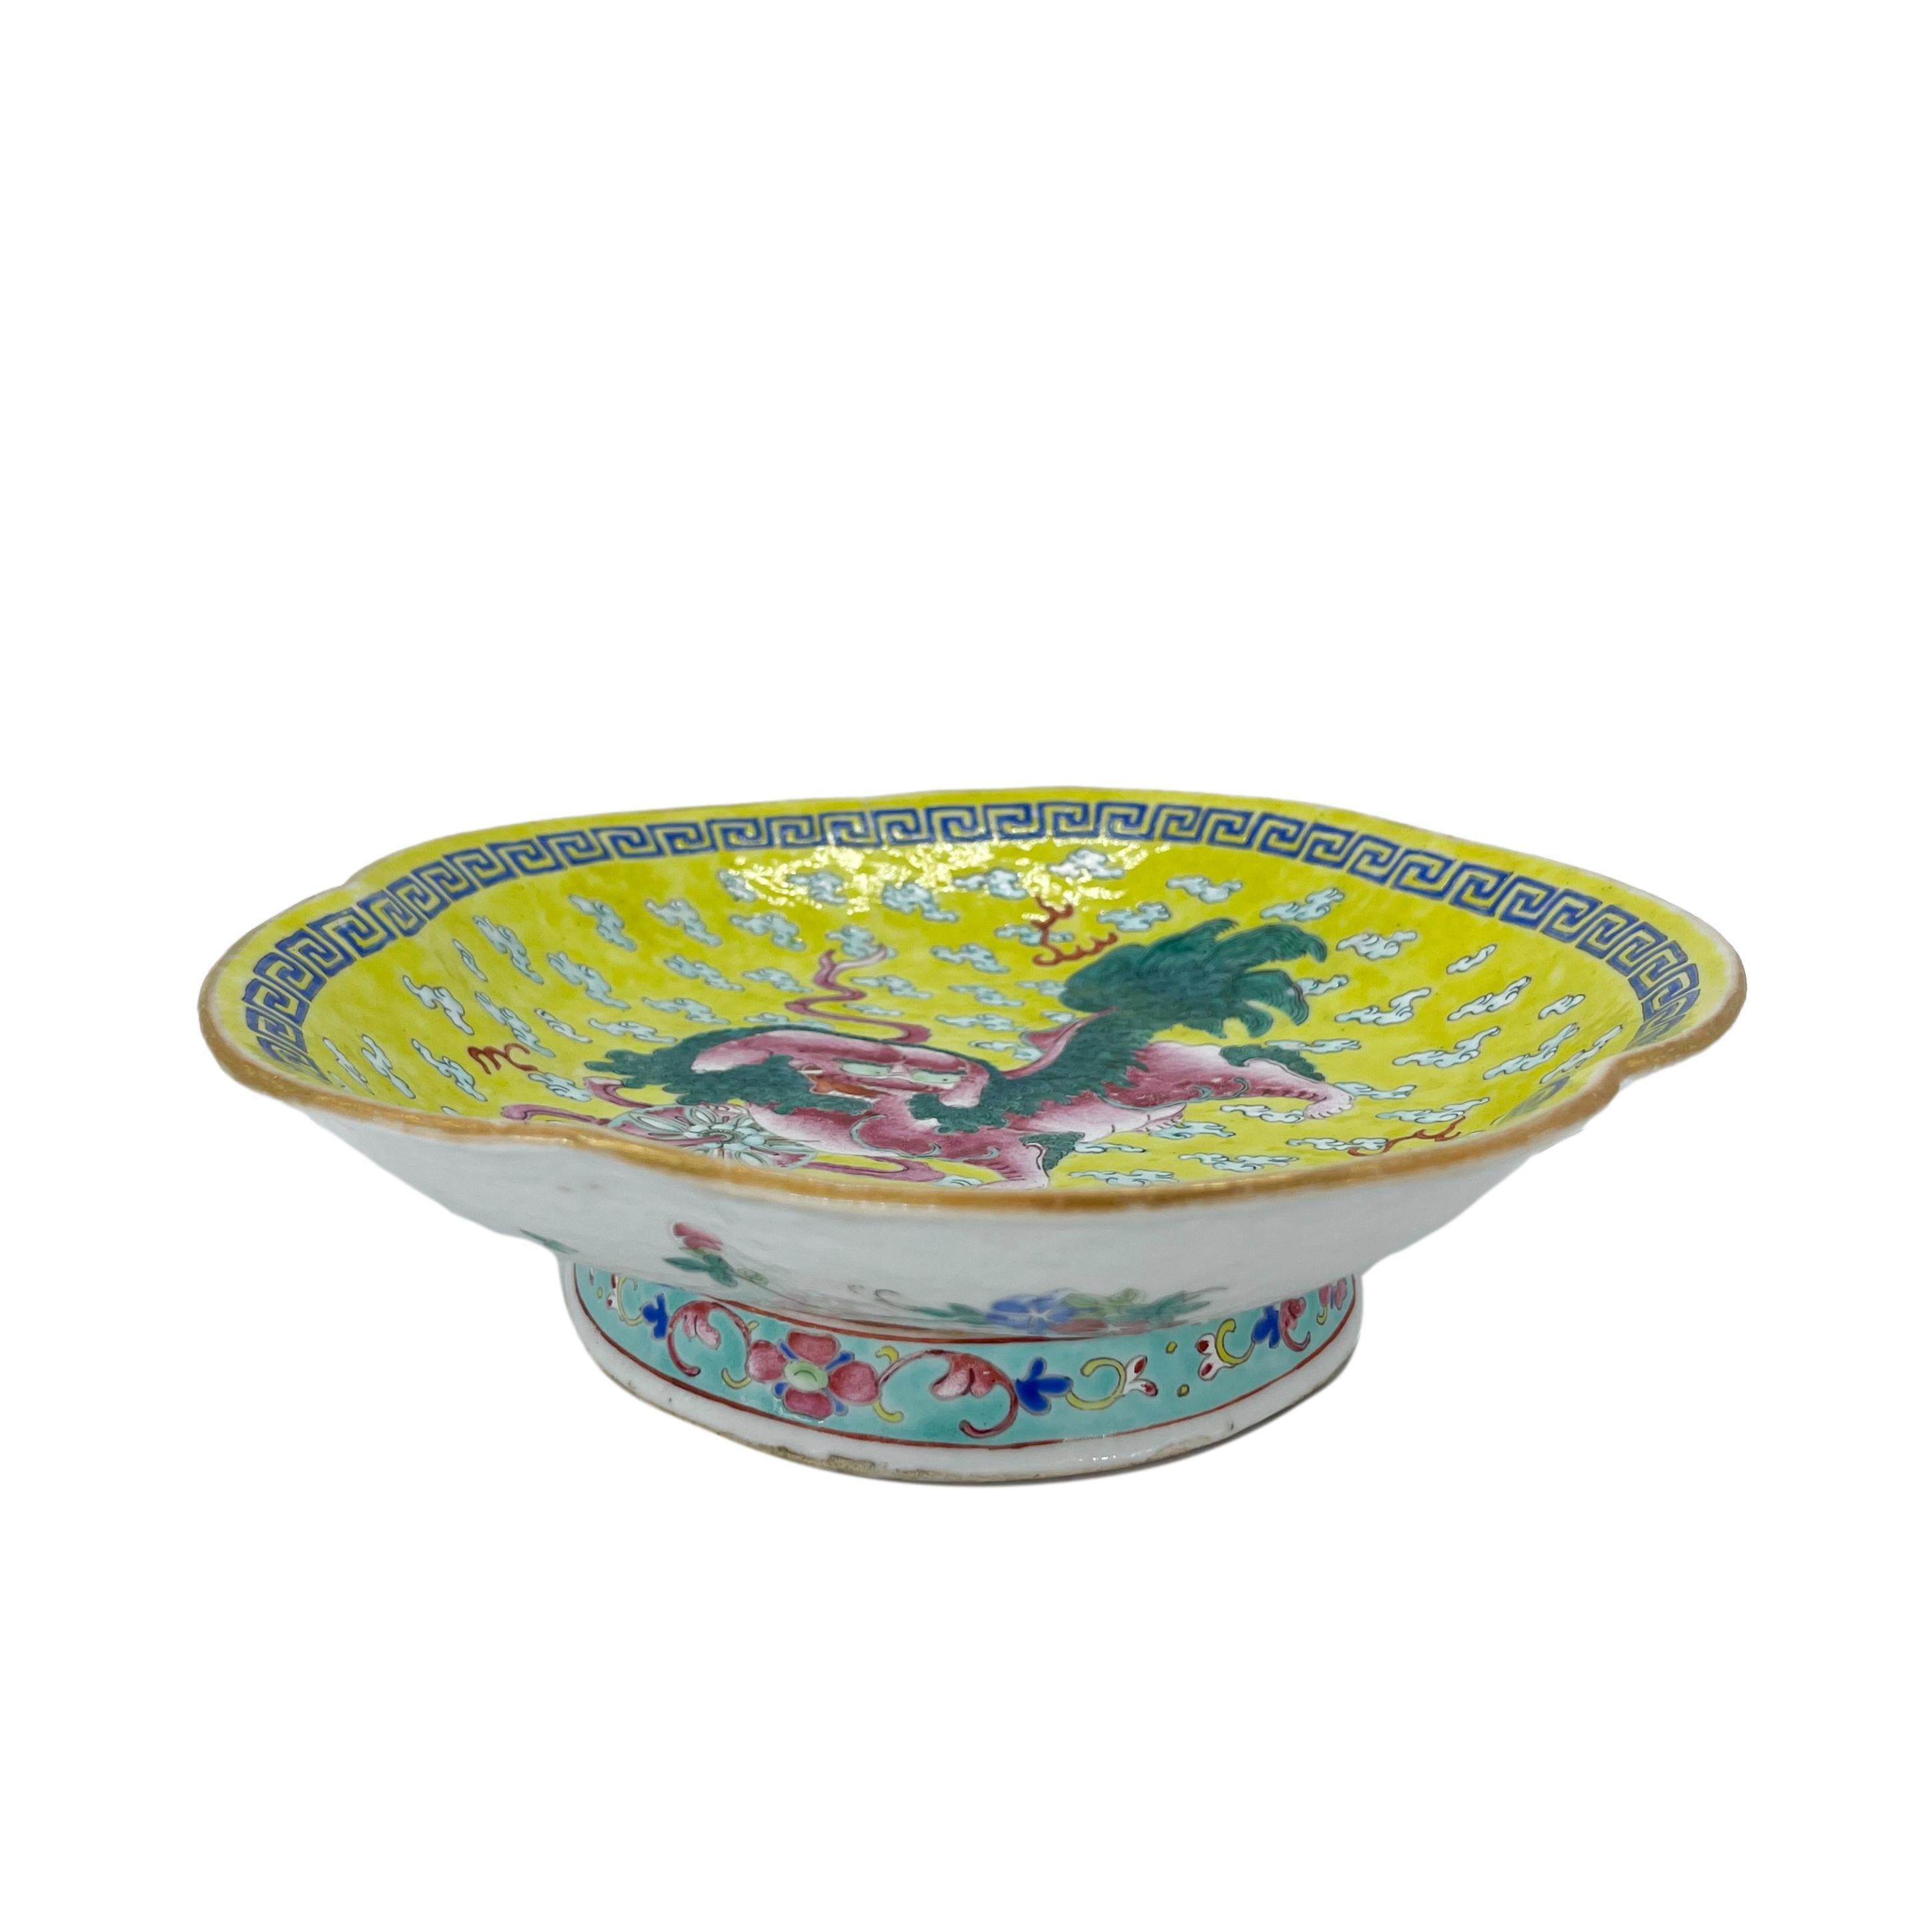 Chinese Export Porcelain Canton Famille Jeune Footed Dish, ca. 1870 For Sale 5